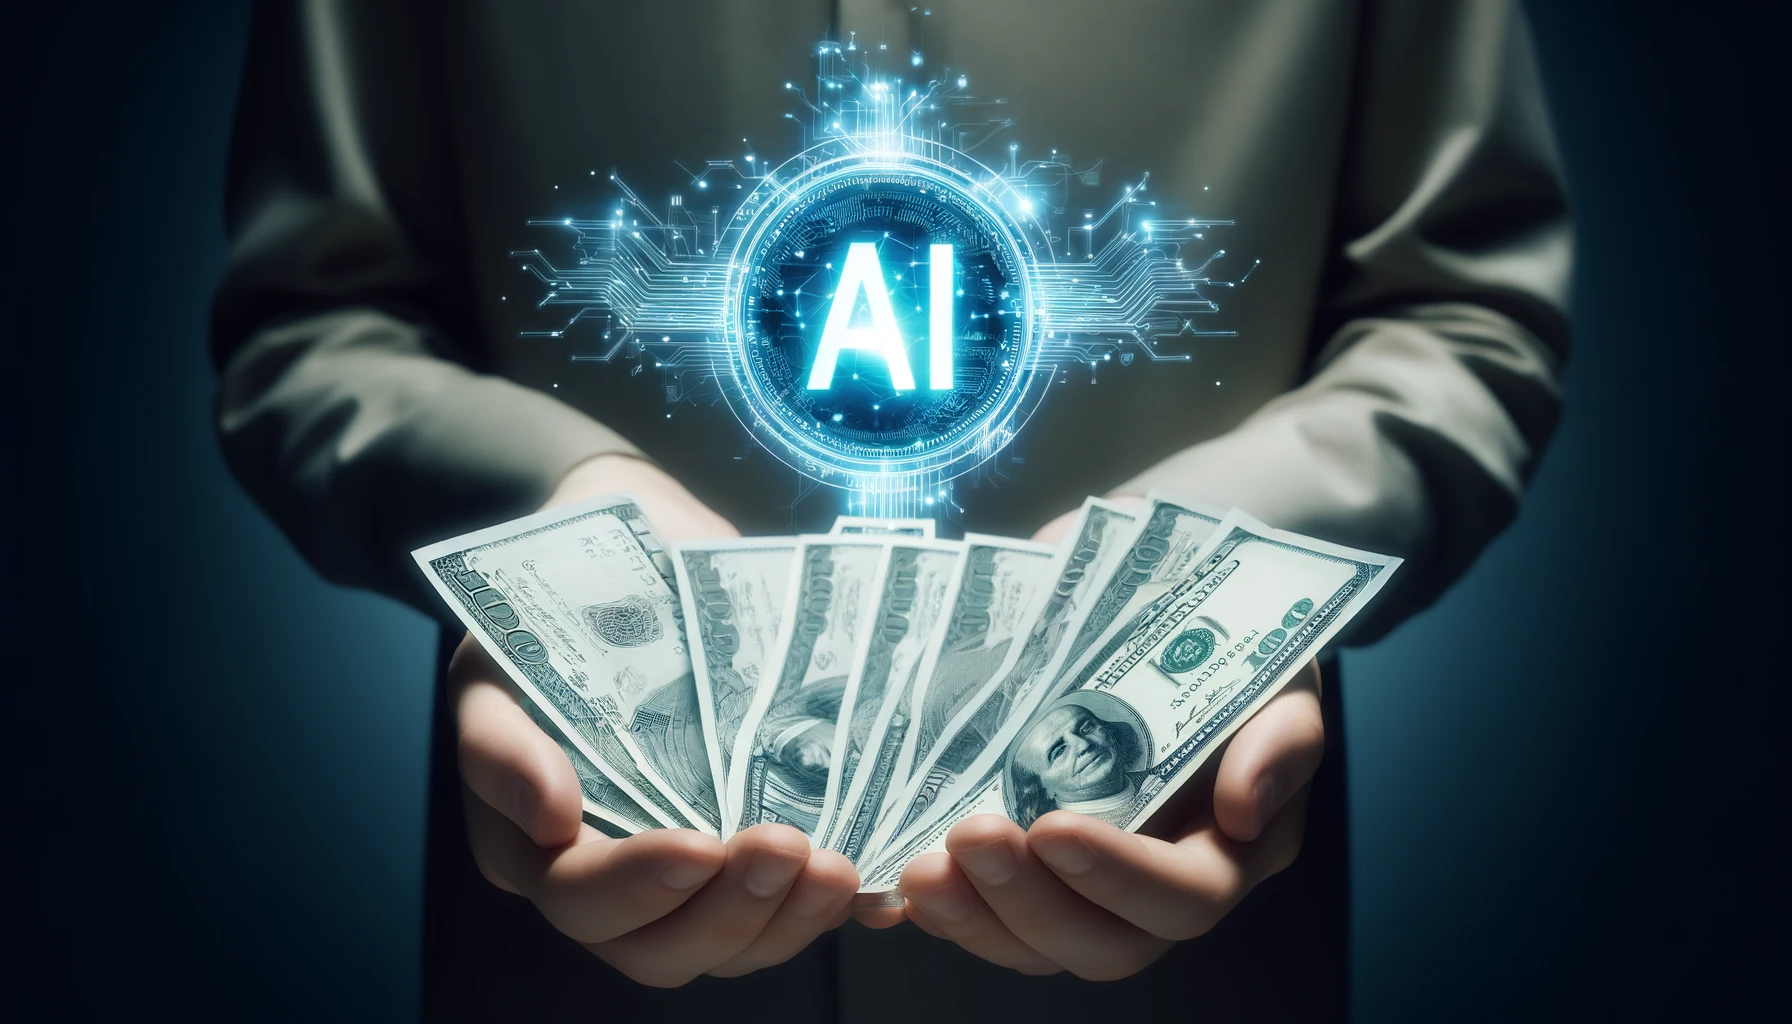 Human hands holding $100 bills with a prominent "AI" symbol glowing around them.